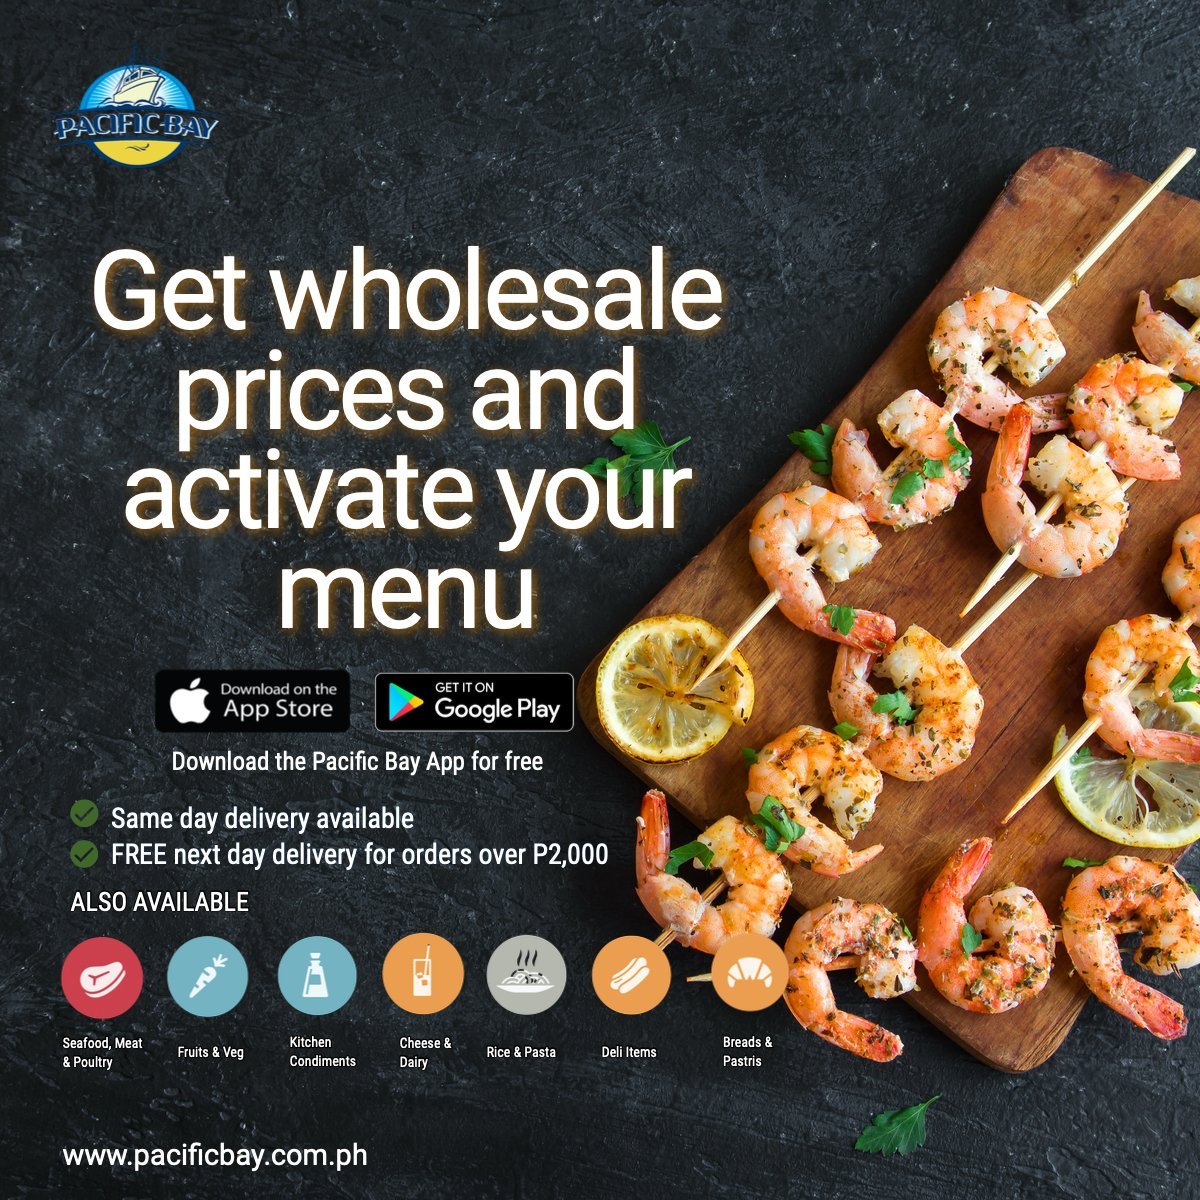 Get access to wholesale prices - Pacific Bay